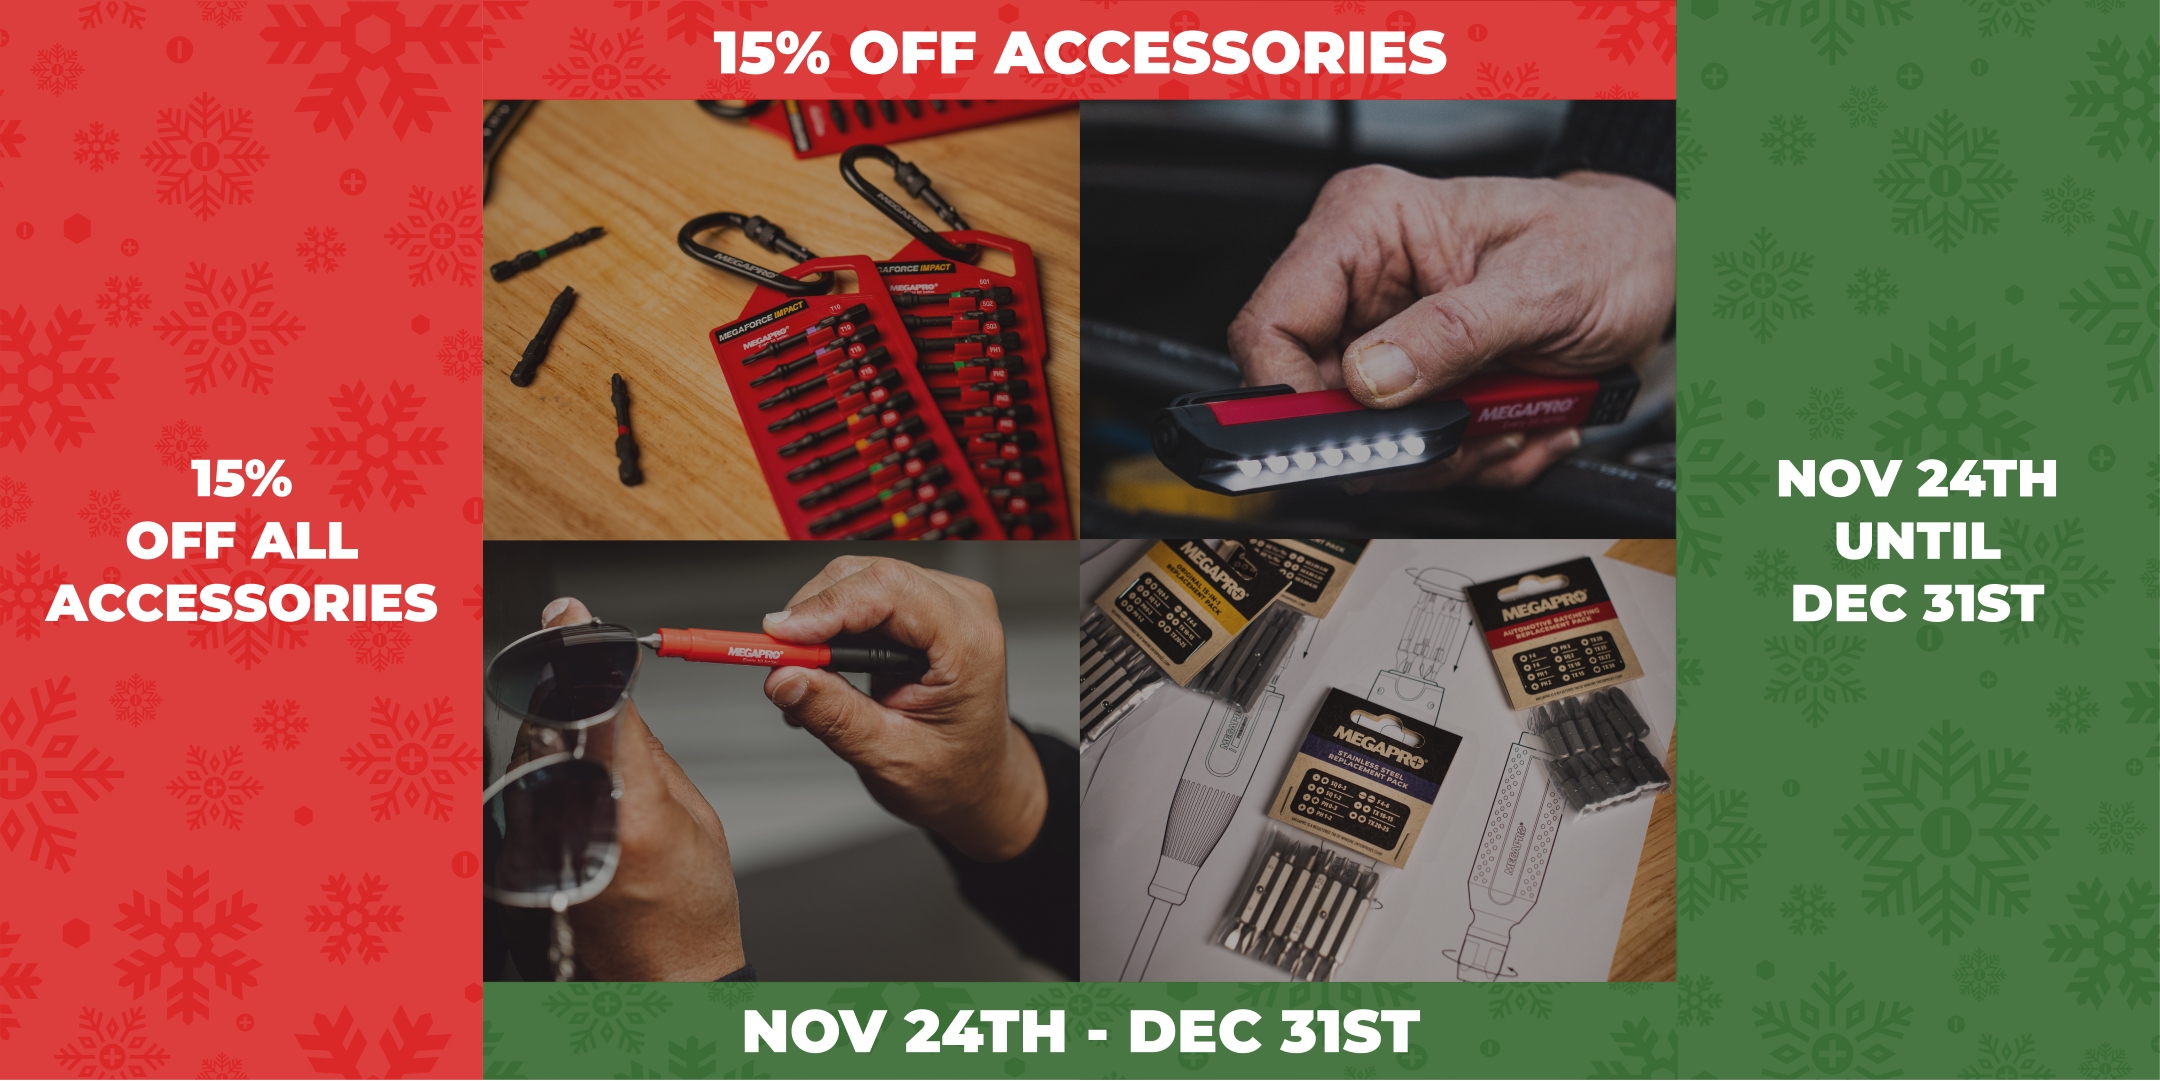 Images of accessories with 15% discount